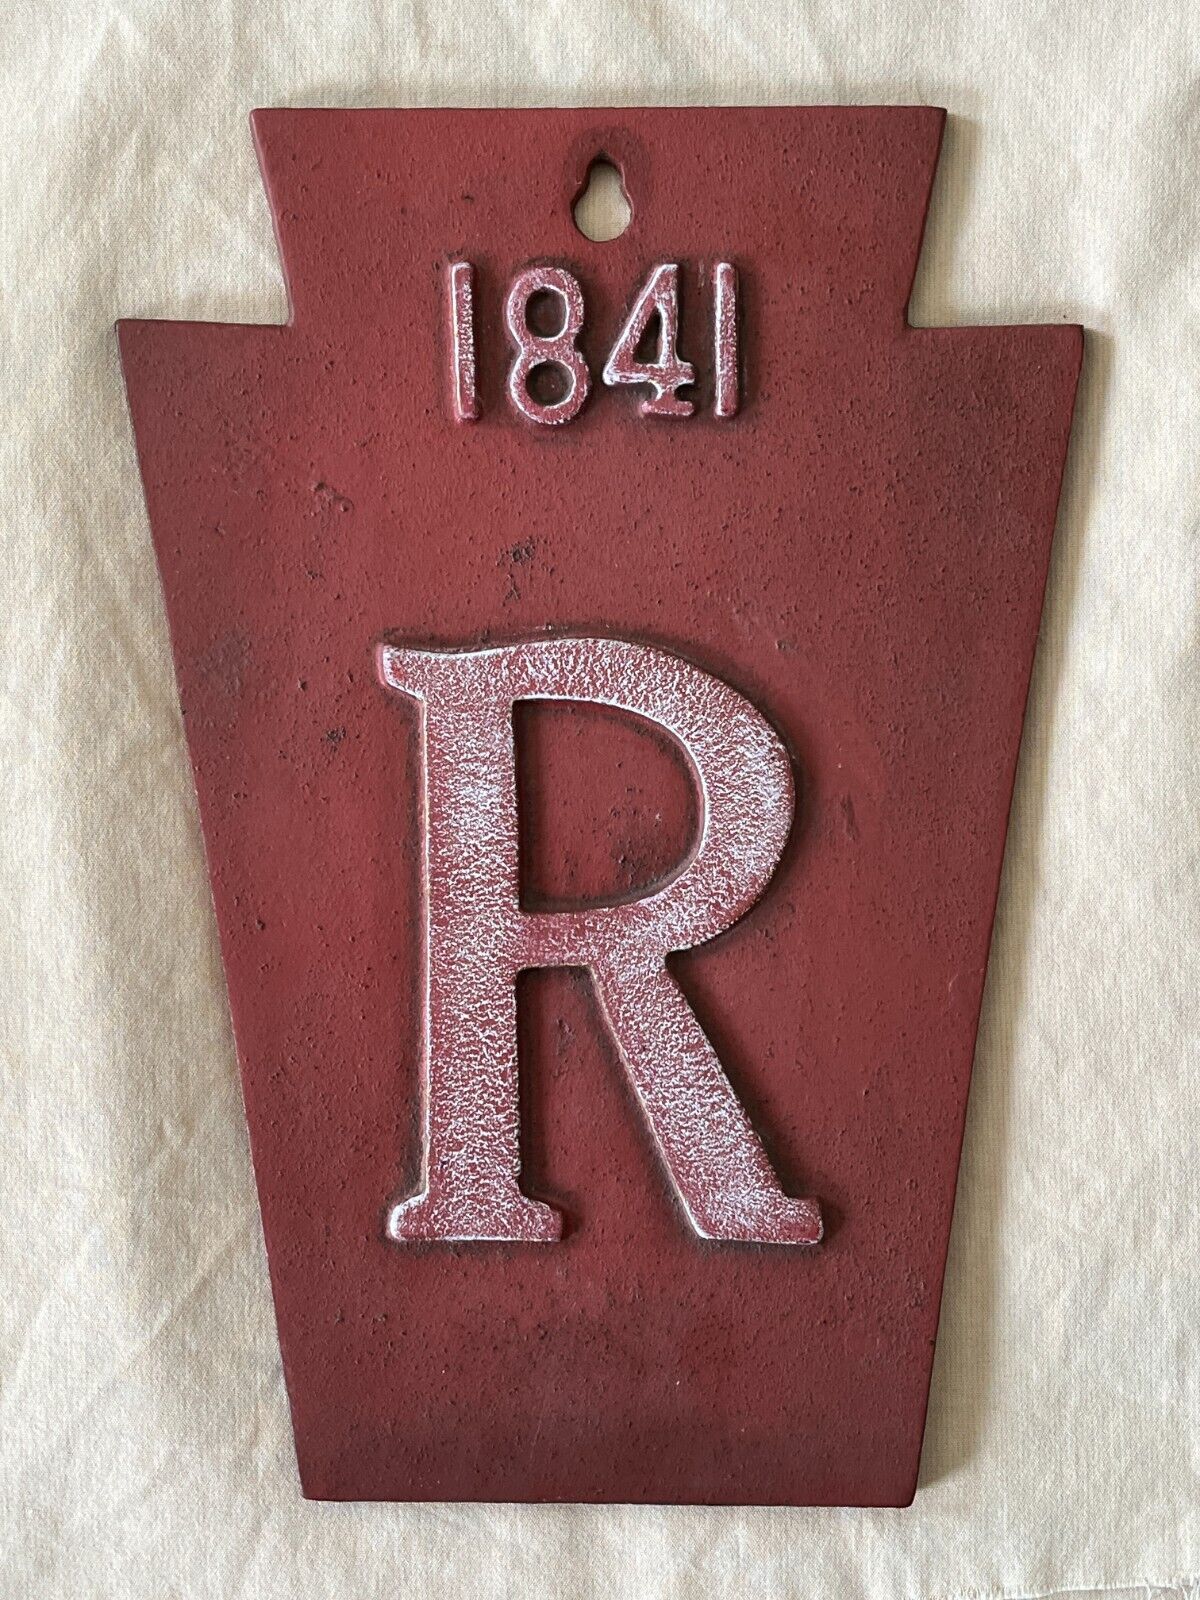 Red Cast Iron Fireman RELIANCE INSURANCE R 1841 Sign / Marker / Plaque